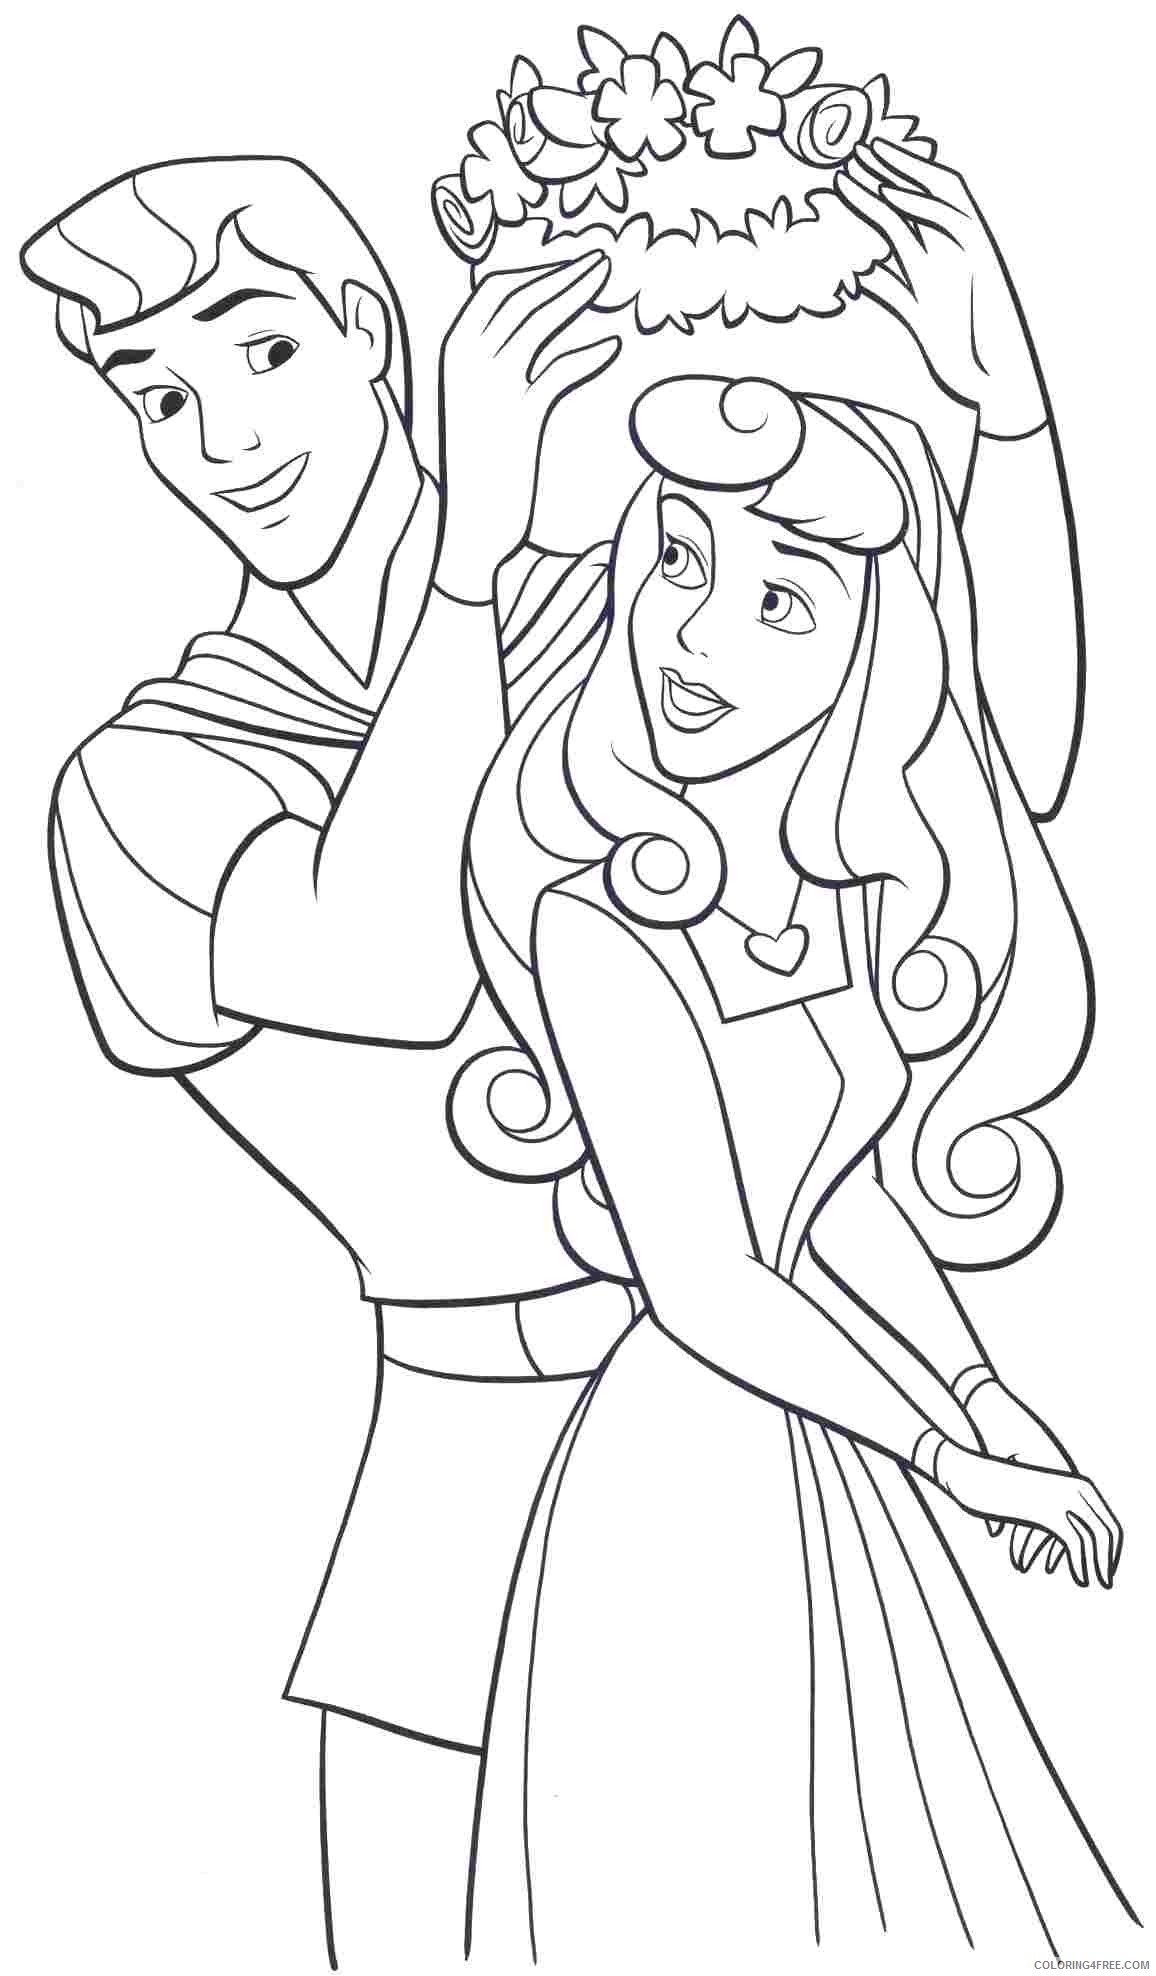 Sleeping Beauty Coloring Pages Cartoons Sleeping Beauty Printable 2020 5593 Coloring4free